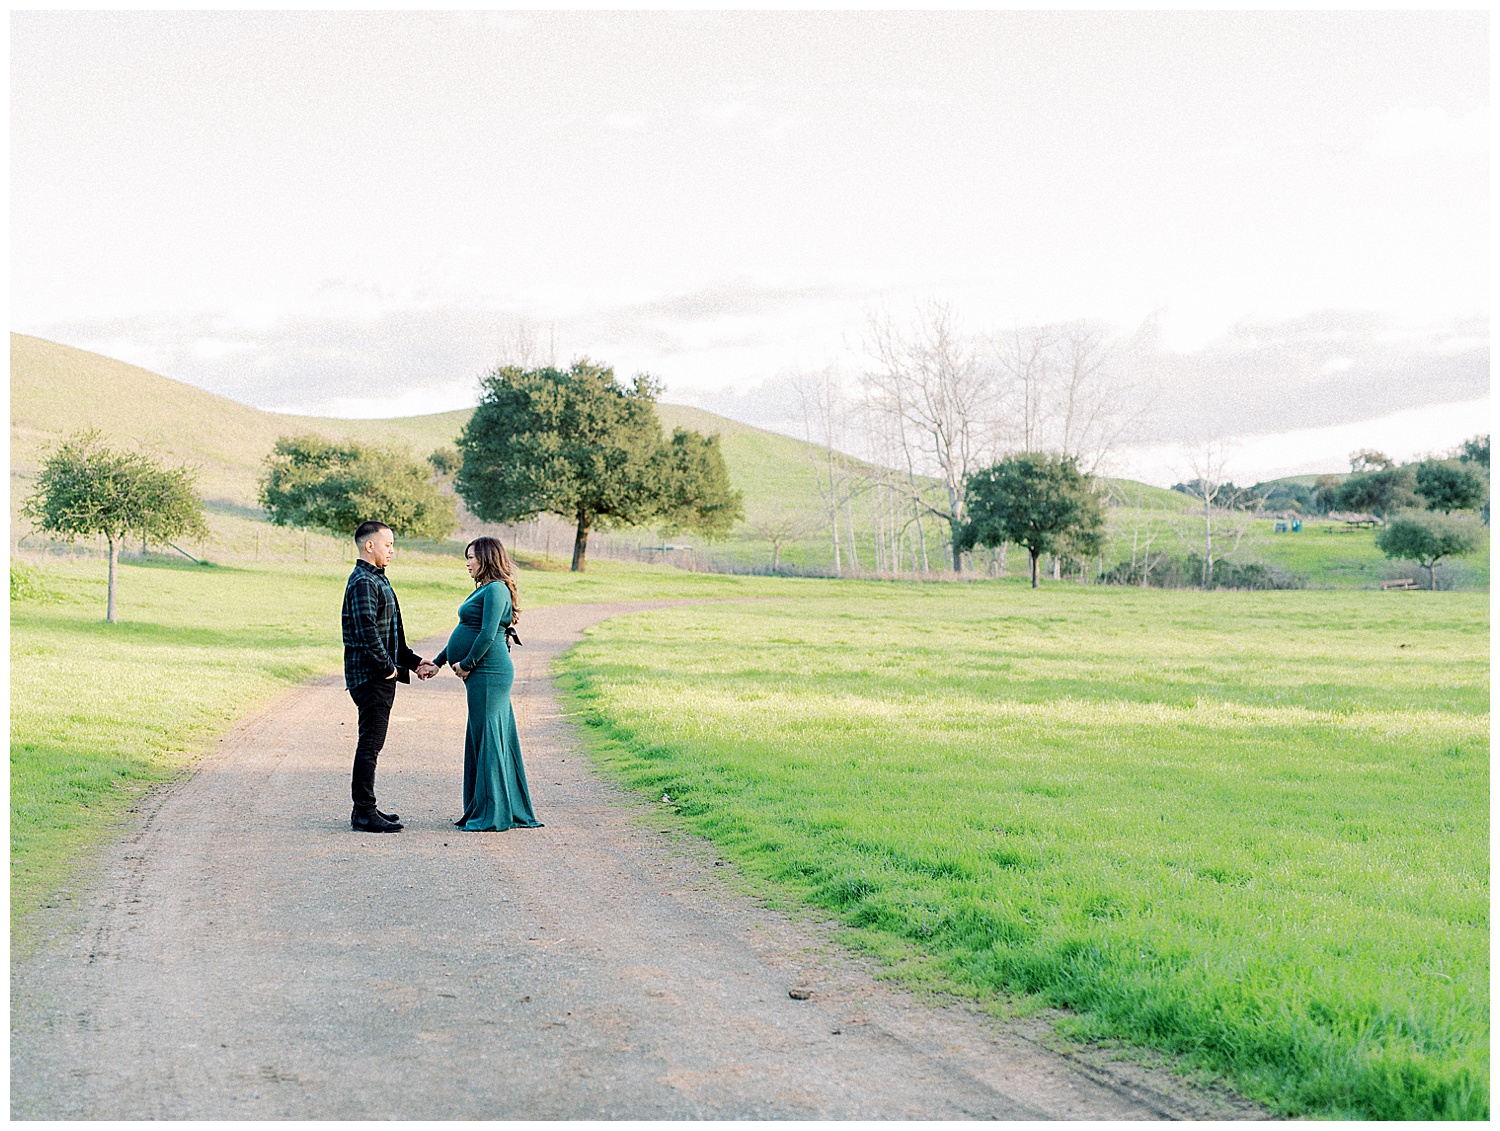 san francisco wedding and portrait photographer doing a maternity session in garin park fremont california, maternity photos with husband